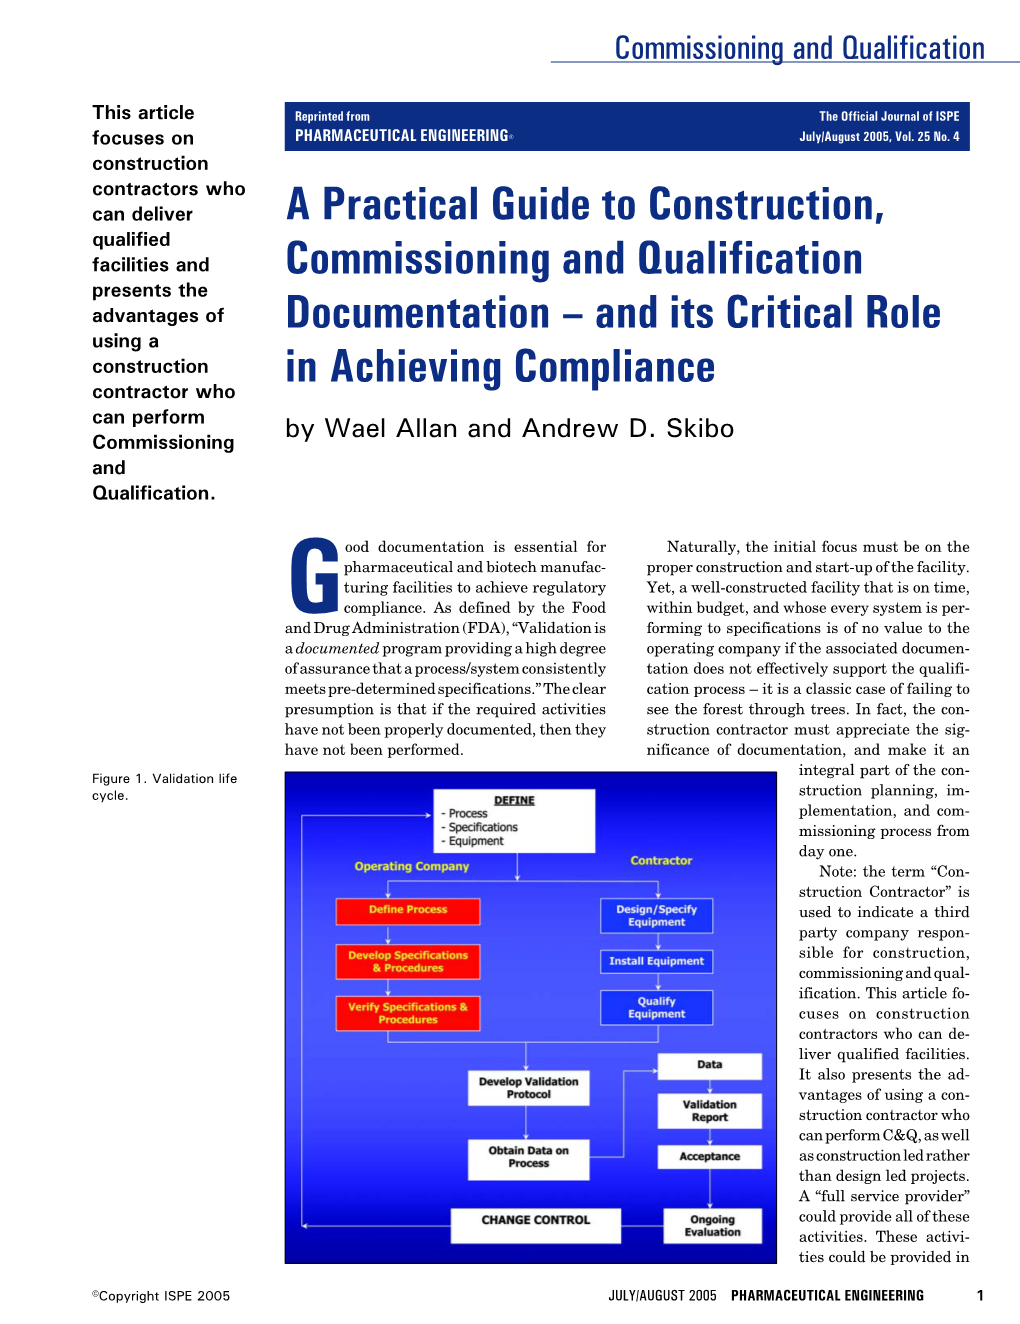 A Practical Guide to Construction, Commissioning and Qualification Documentation – and Its Critical Role in Achieving Complian